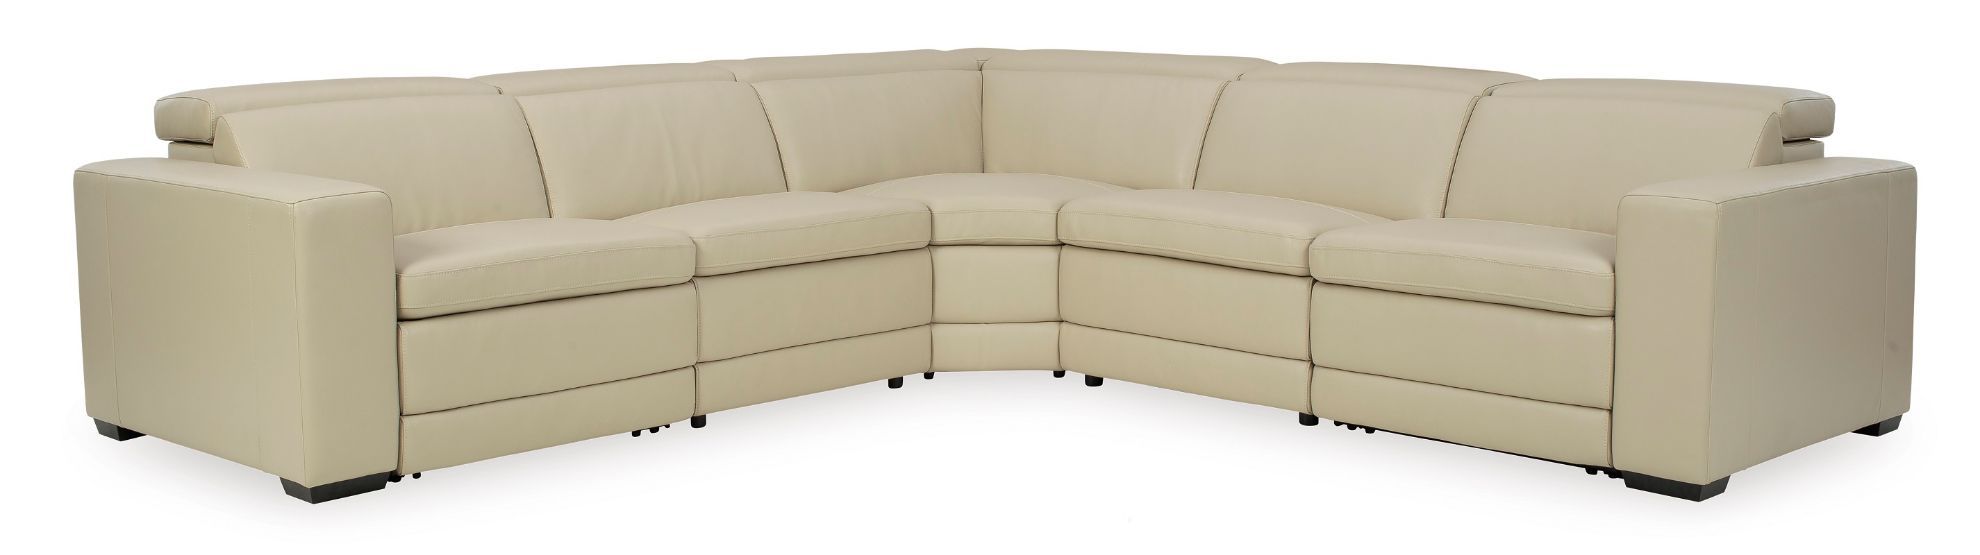 Texline 6pc Sectional